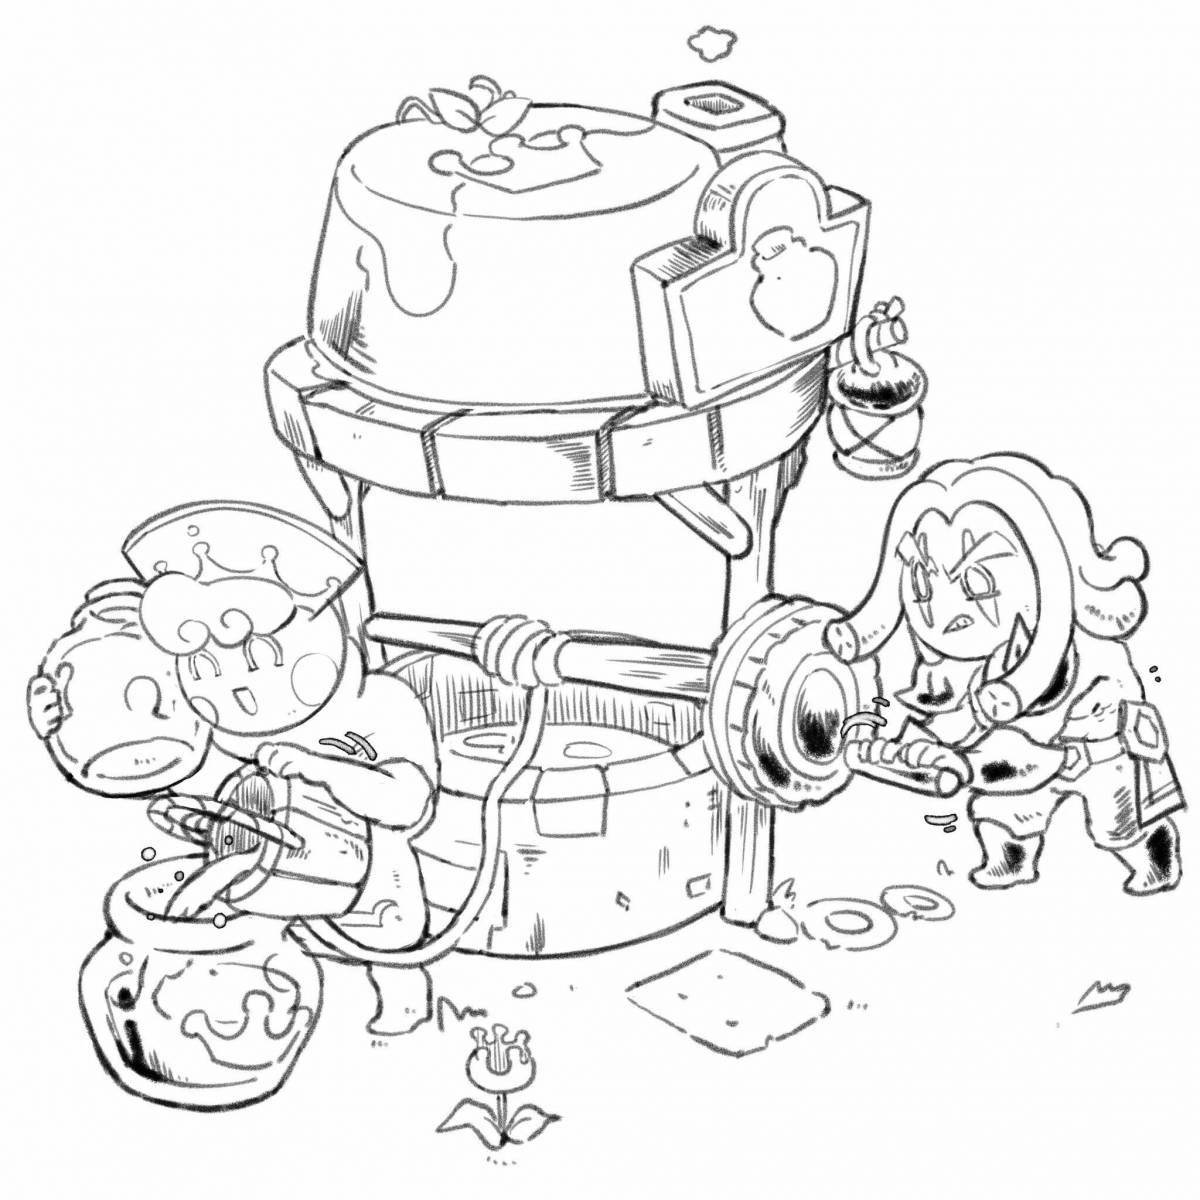 Charming cookie run kingdom coloring book